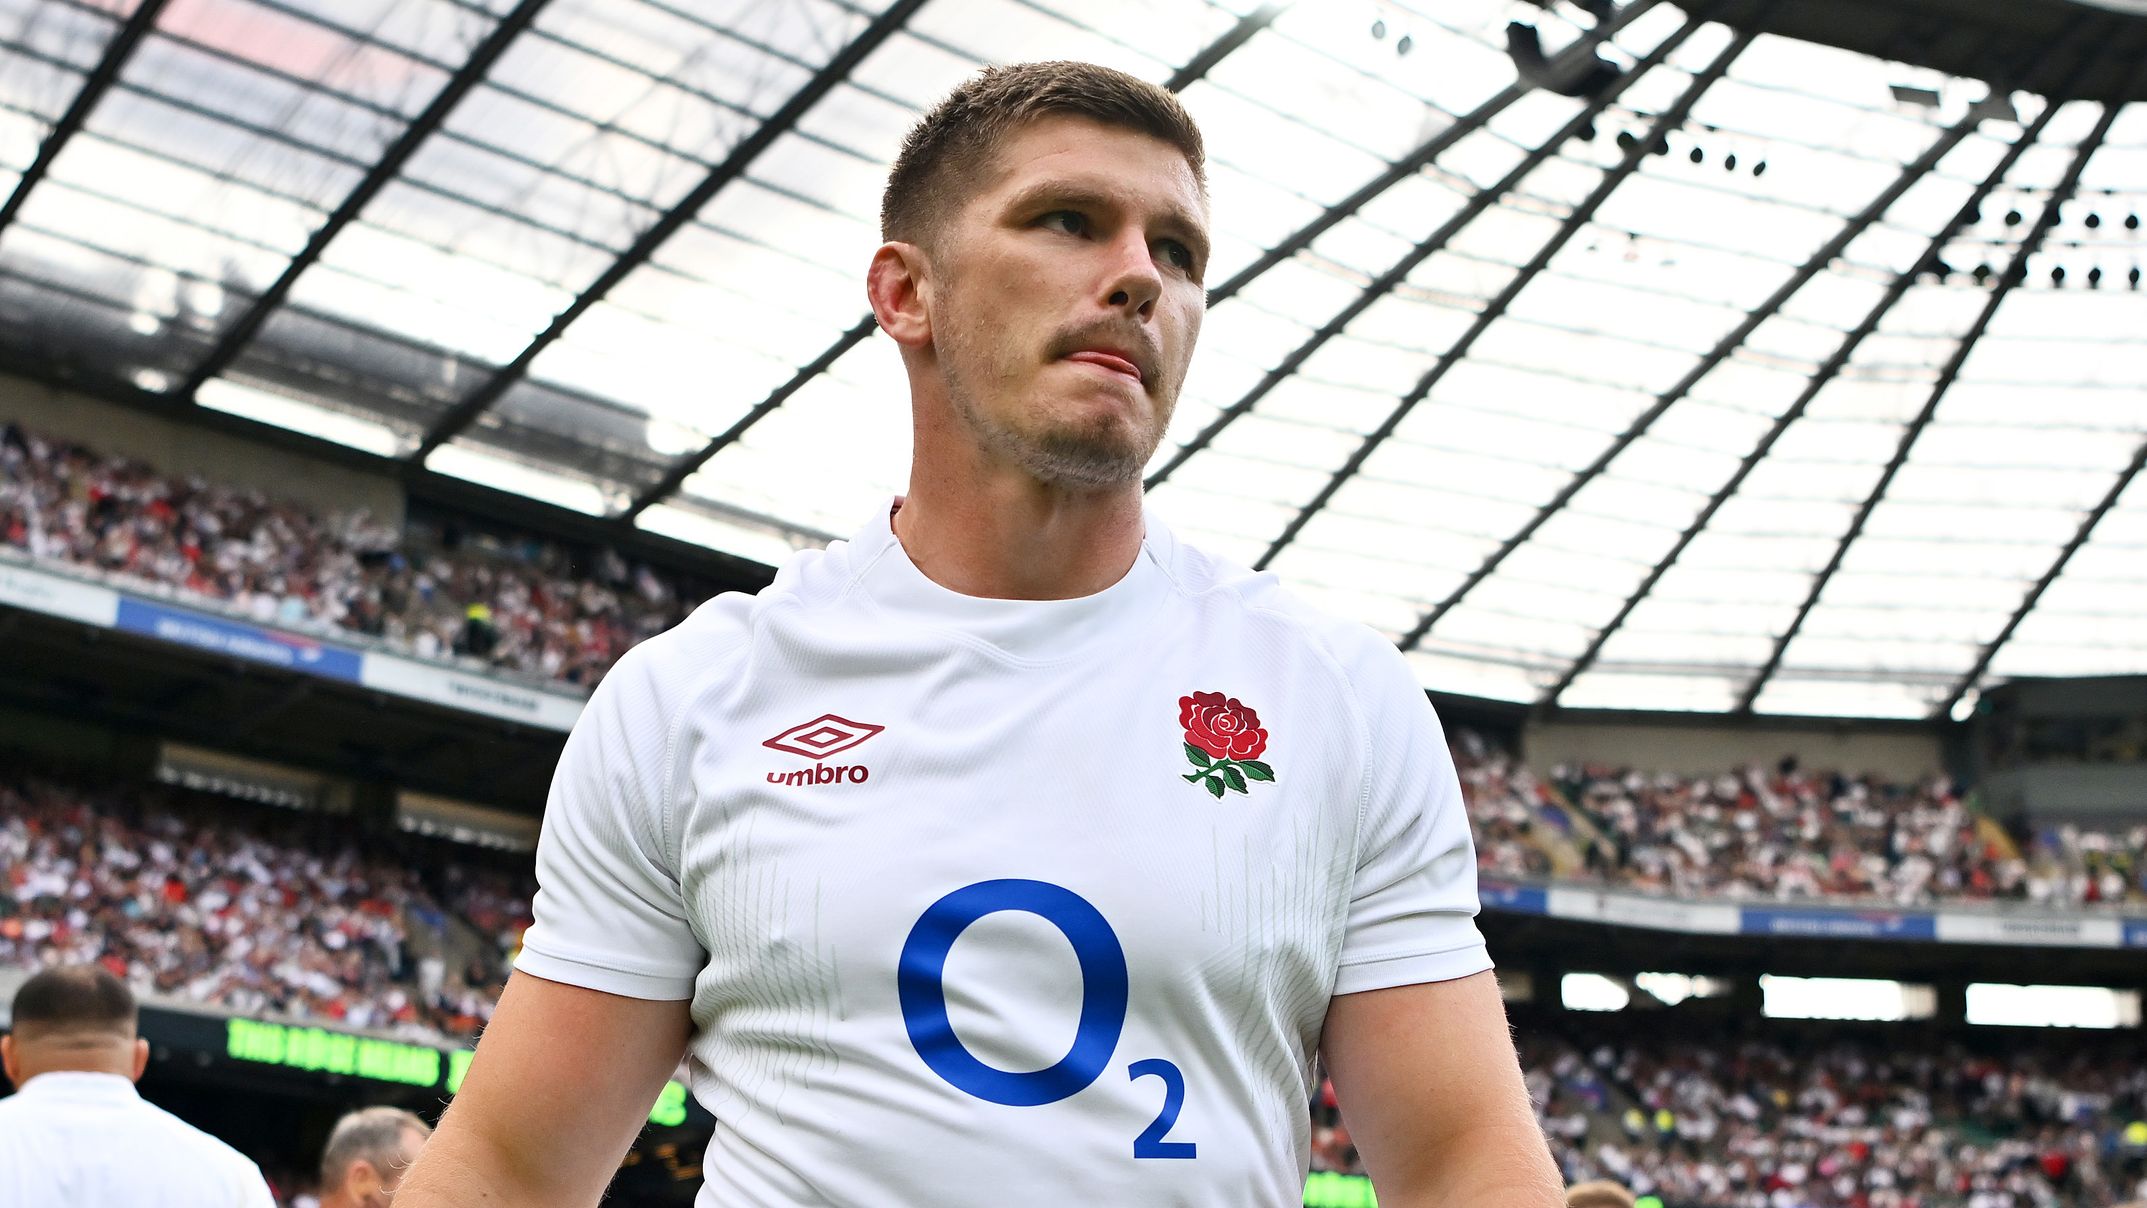 Owen Farrell stepped away from the England captaincy after receiving online abuse.